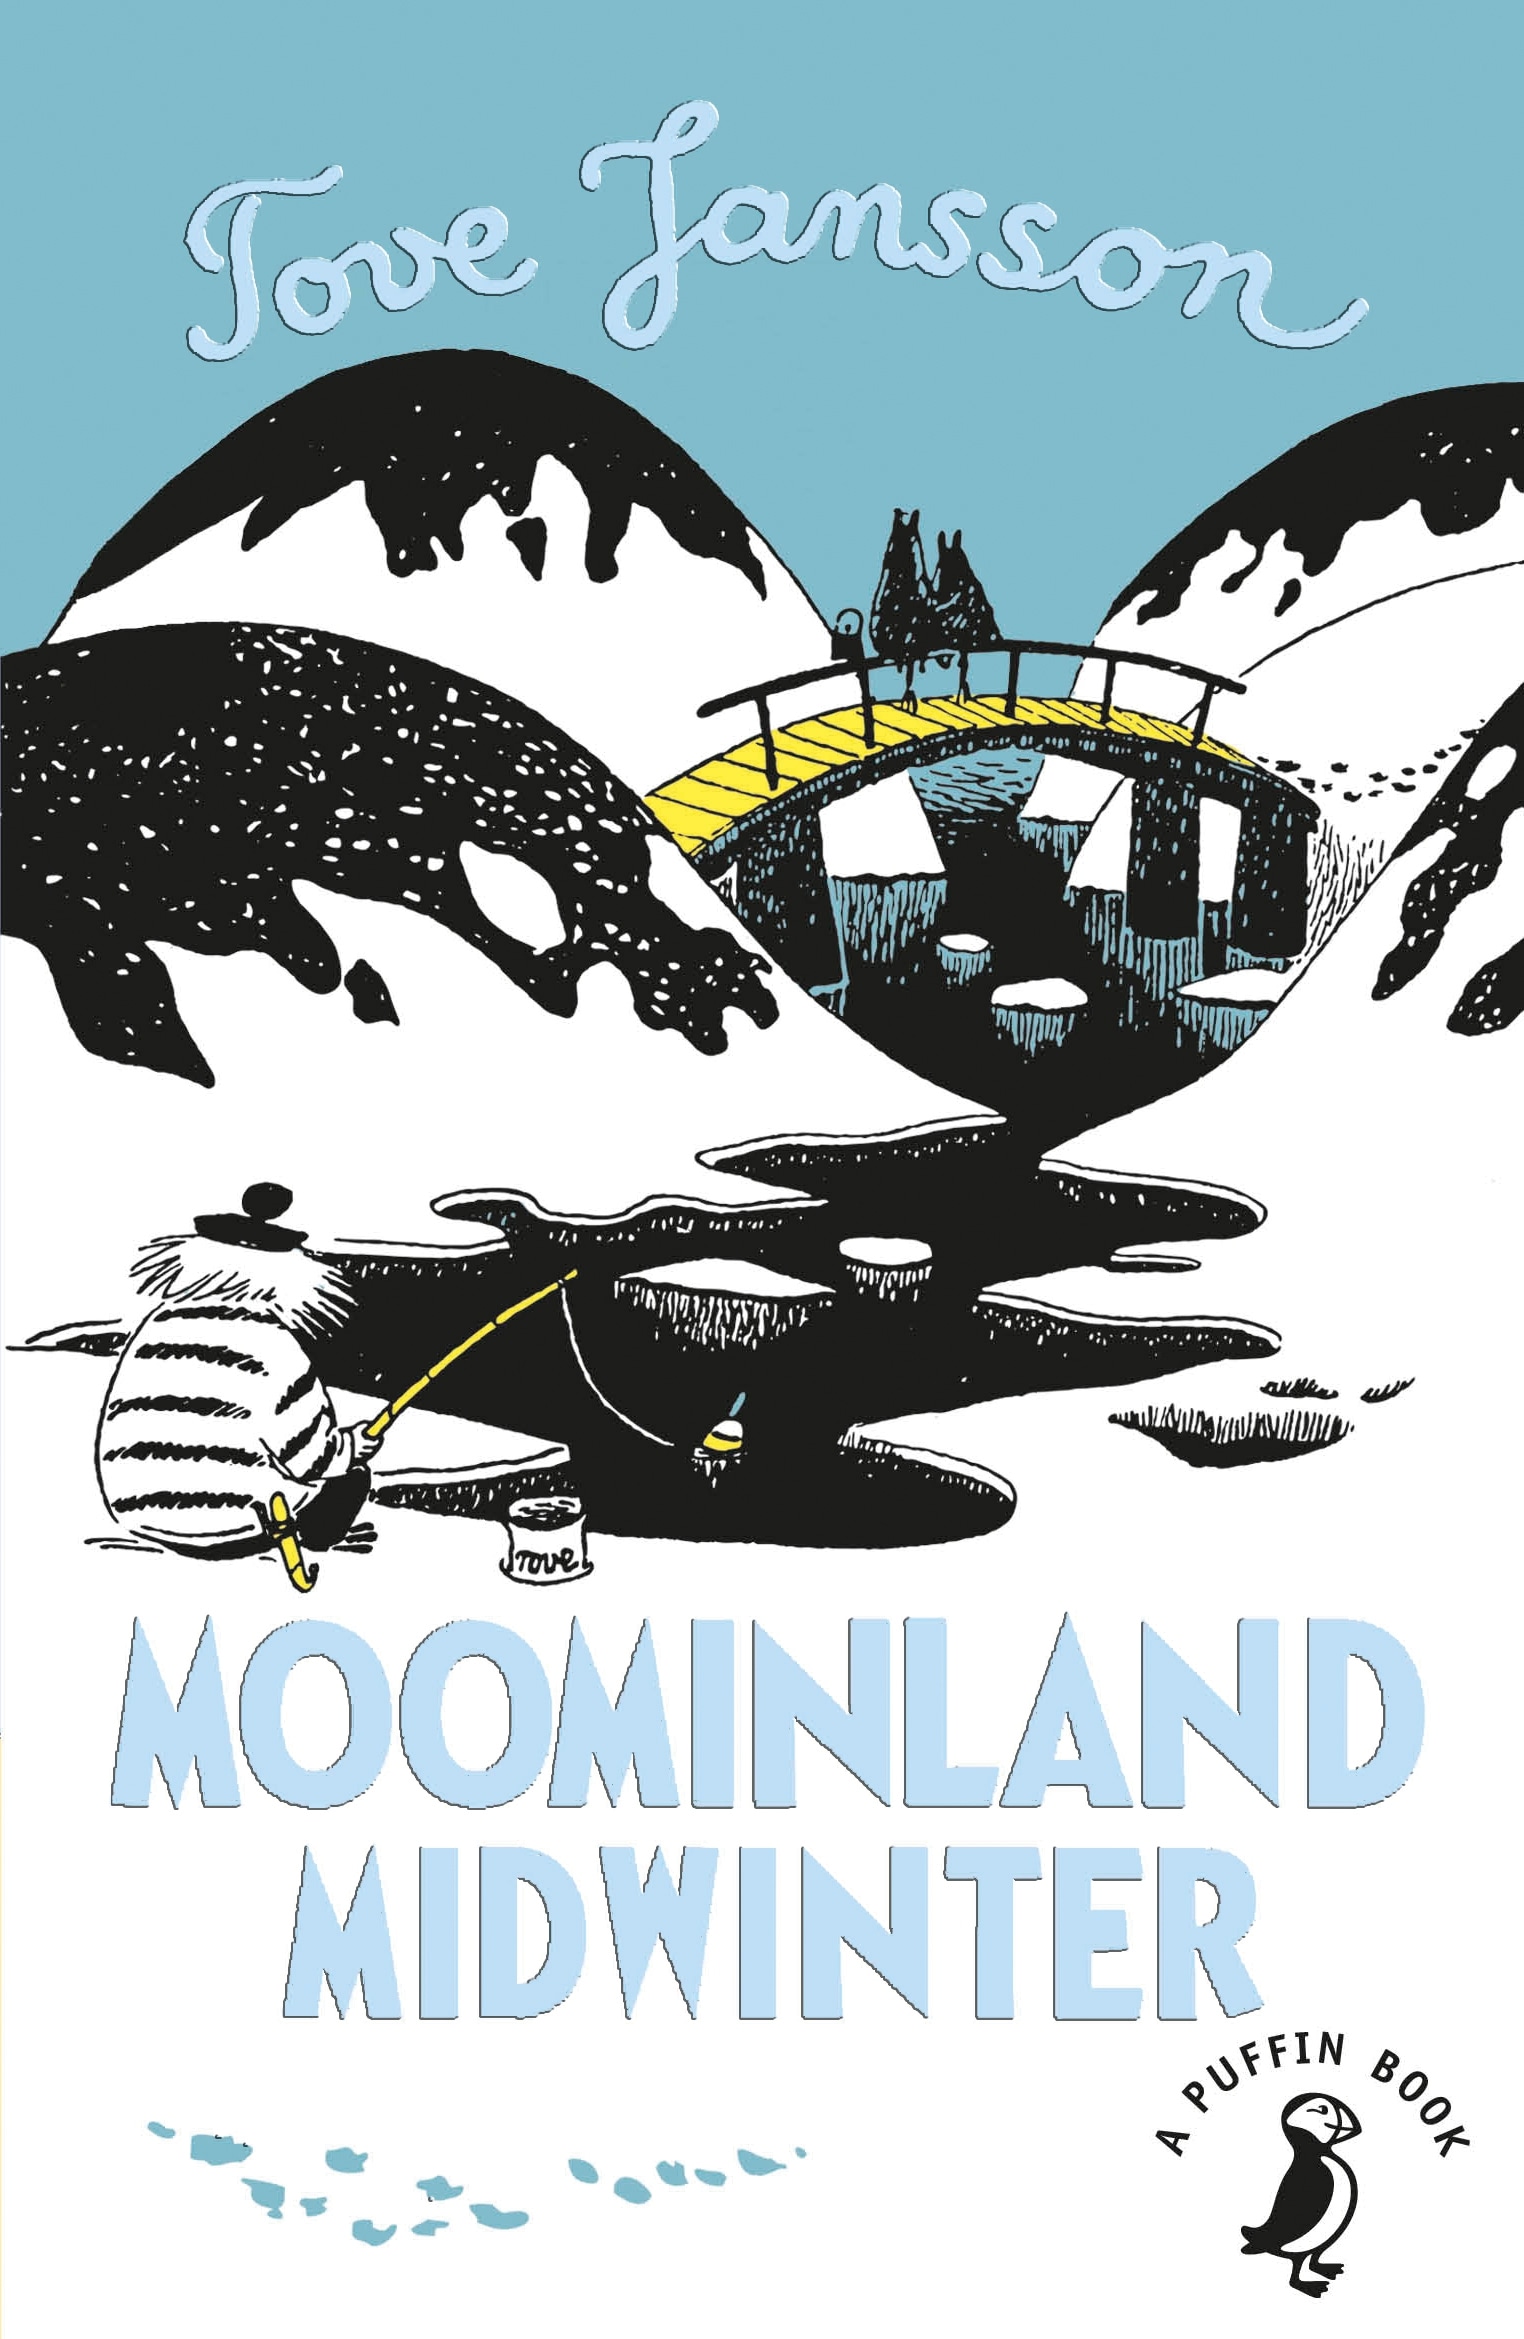 Book “Moominland Midwinter” by Tove Jansson — February 7, 2019